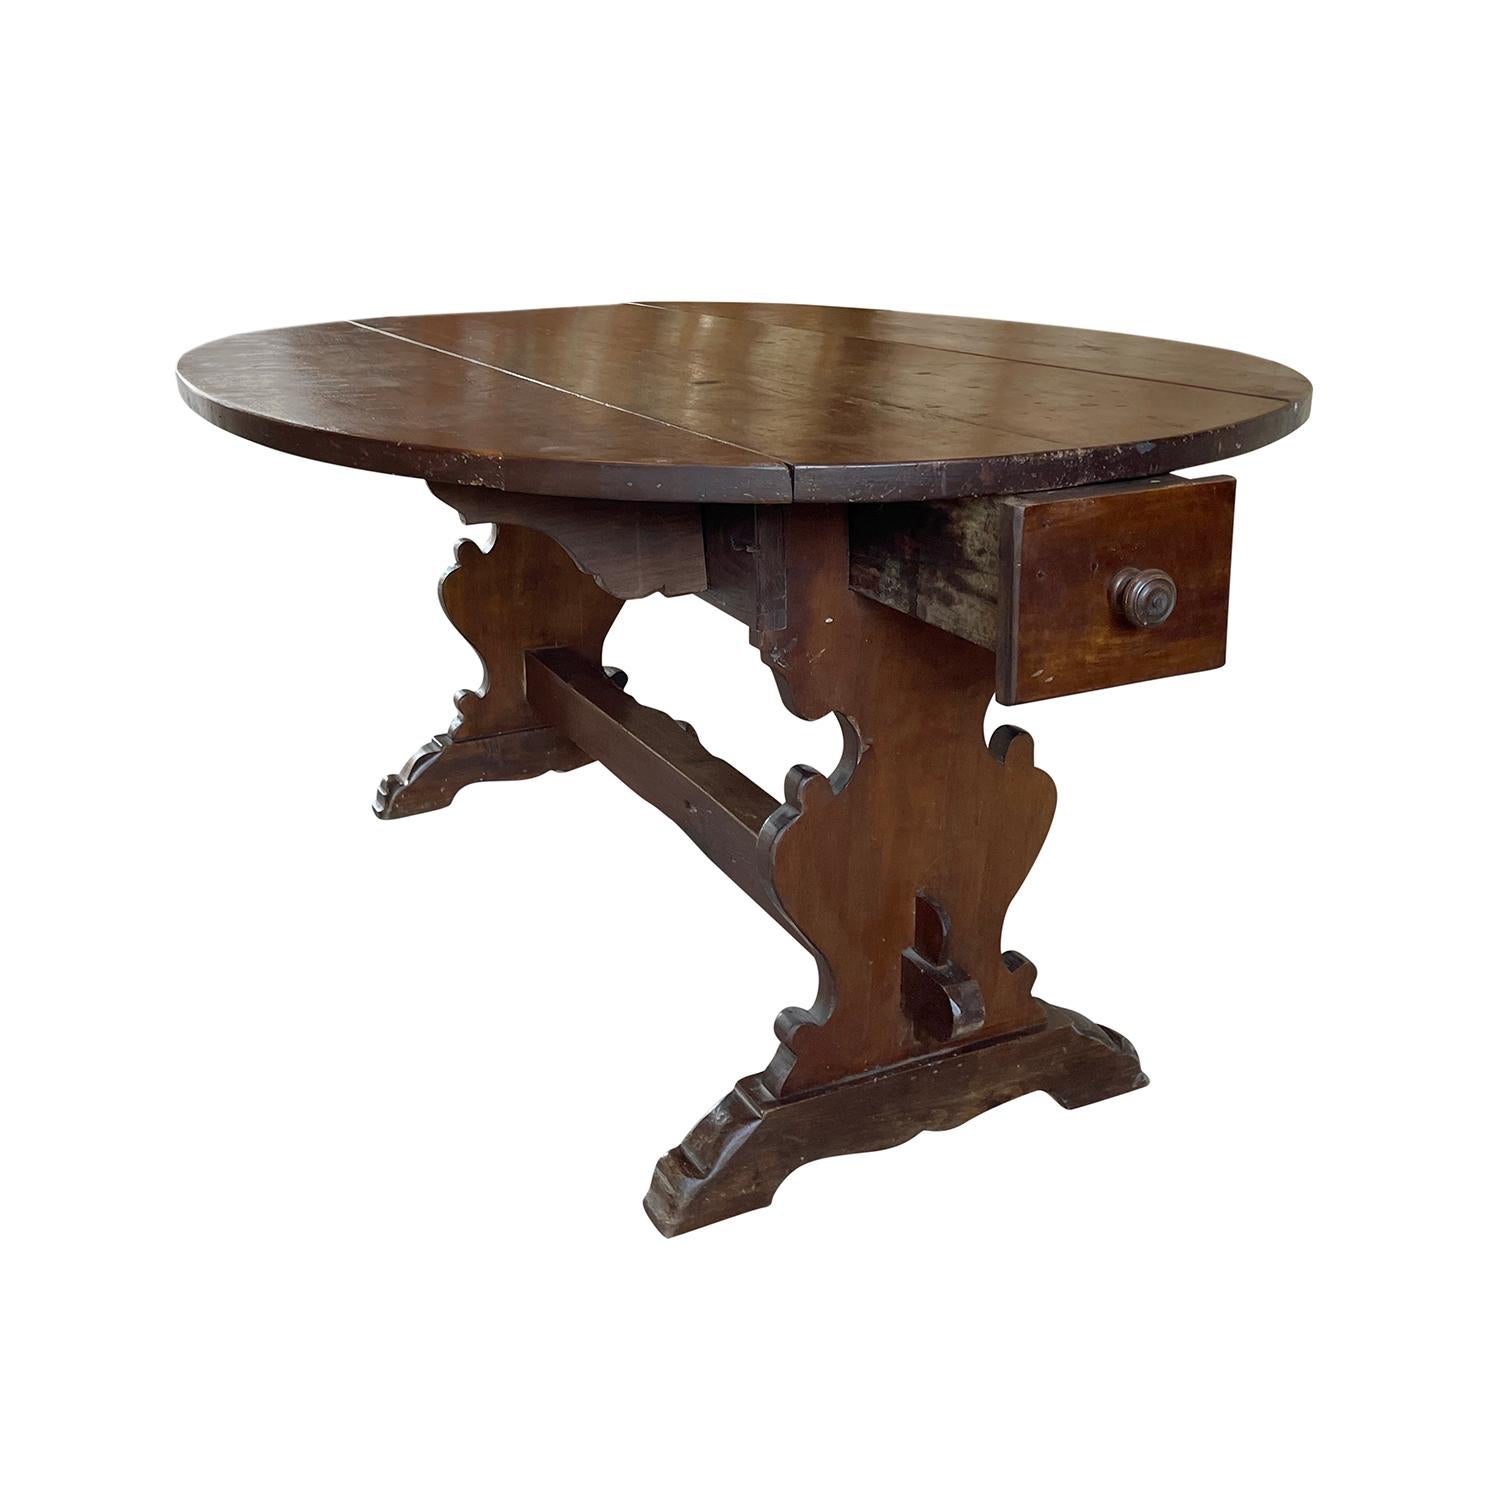 Hand-Carved 19th Century Italian Antique Oval Drop Leaf Table, Tuscan Dining Room Table For Sale